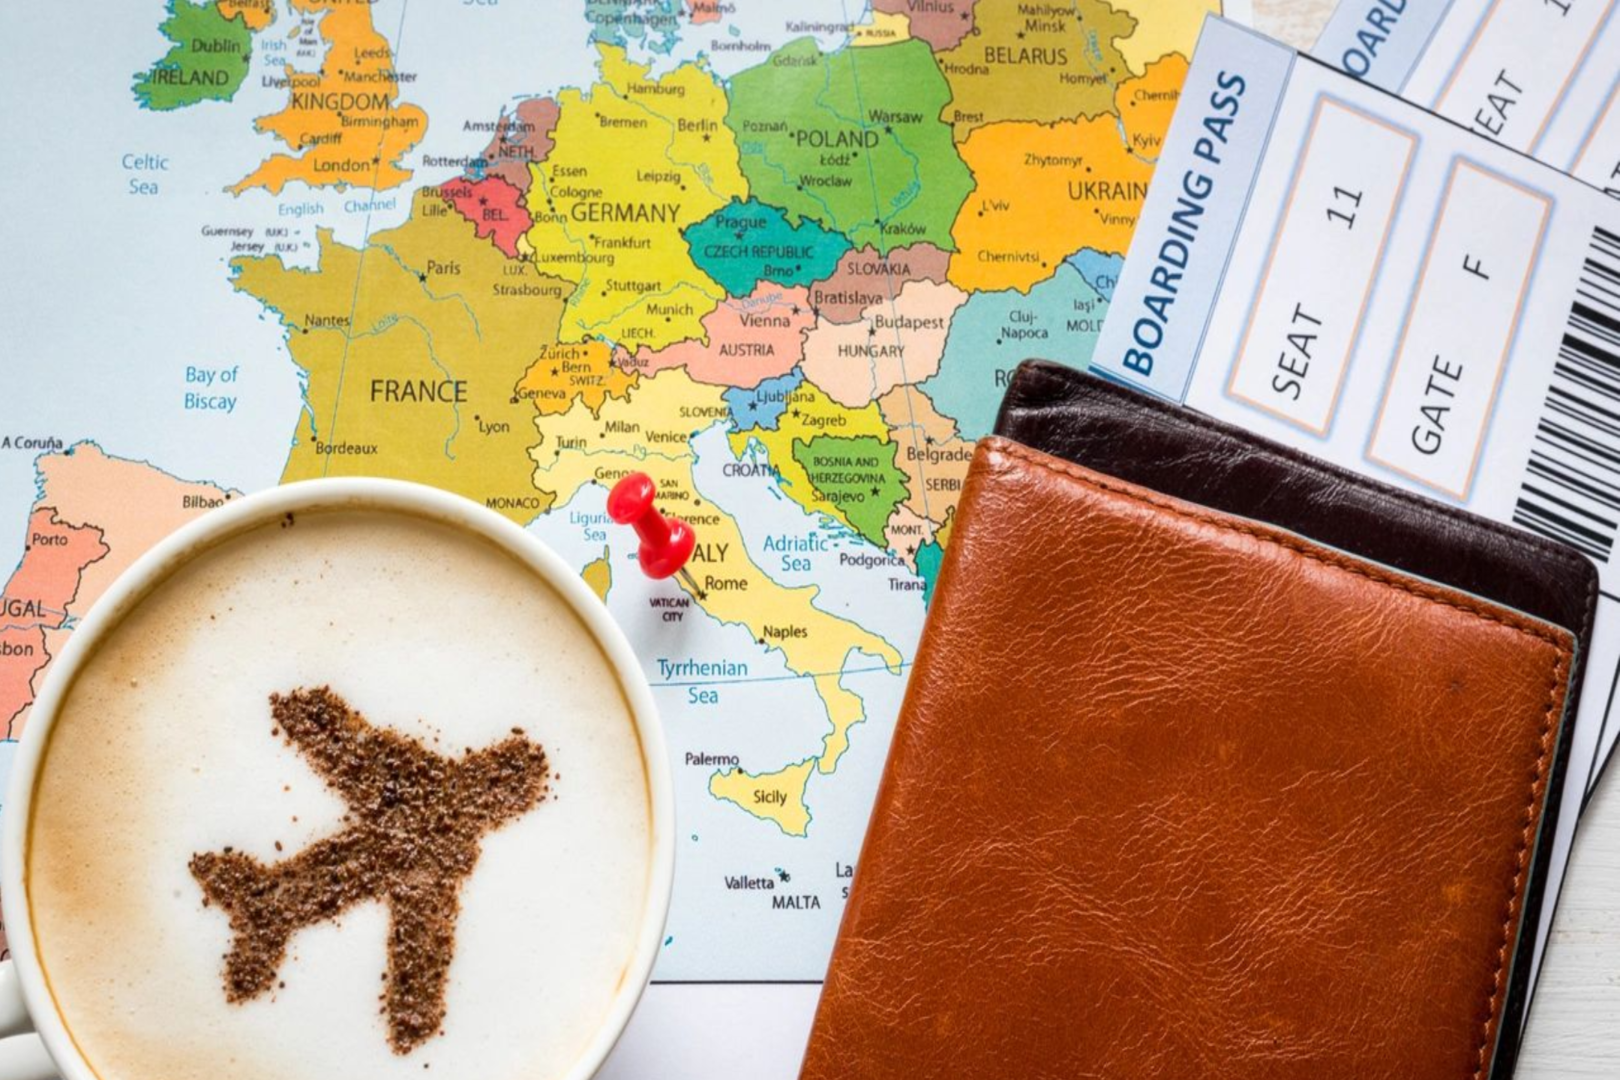 A cup of coffee and a wallet on top of a map